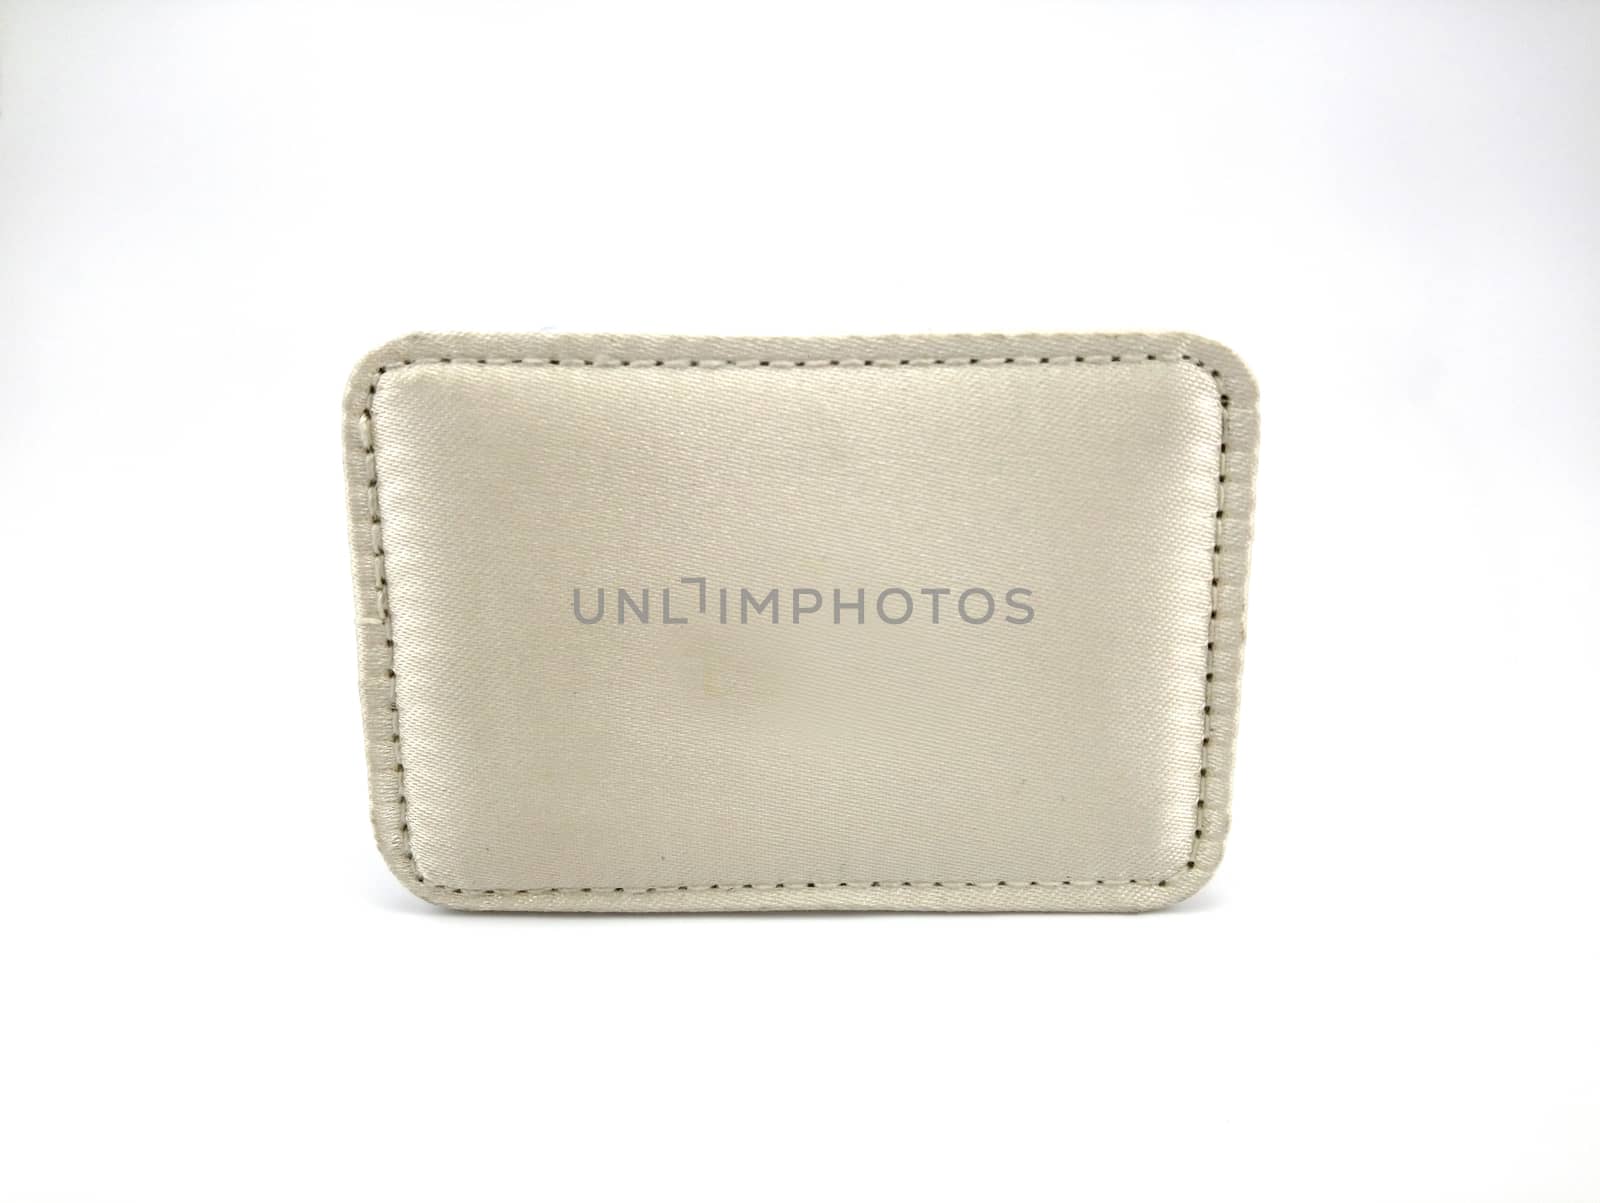 Light brown portable leather mirror case use to see one self reflection for make up